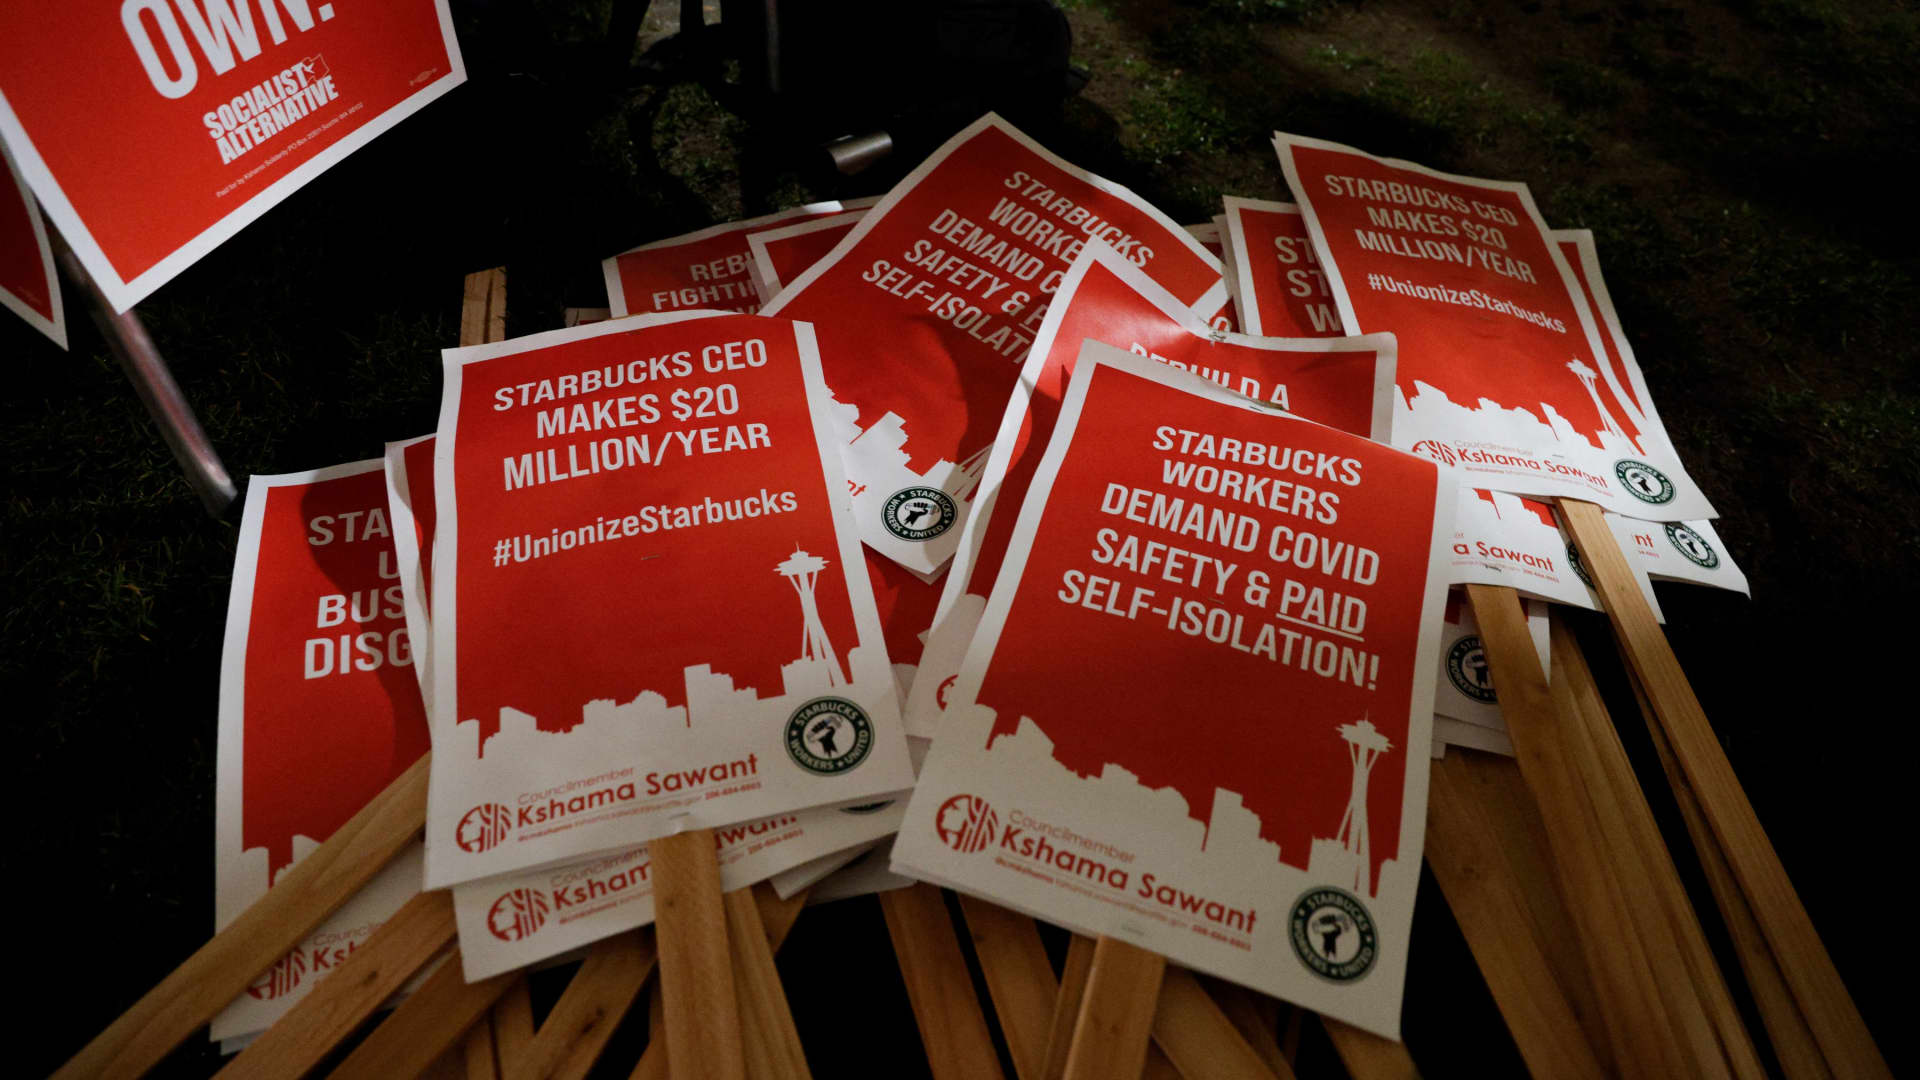 Picket signs are pictured at a rally in support of workers of two Seattle Starbucks locations that announced plans to unionize, during an evening rally at Cal Anderson Park in Seattle, on Jan. 25, 2022.